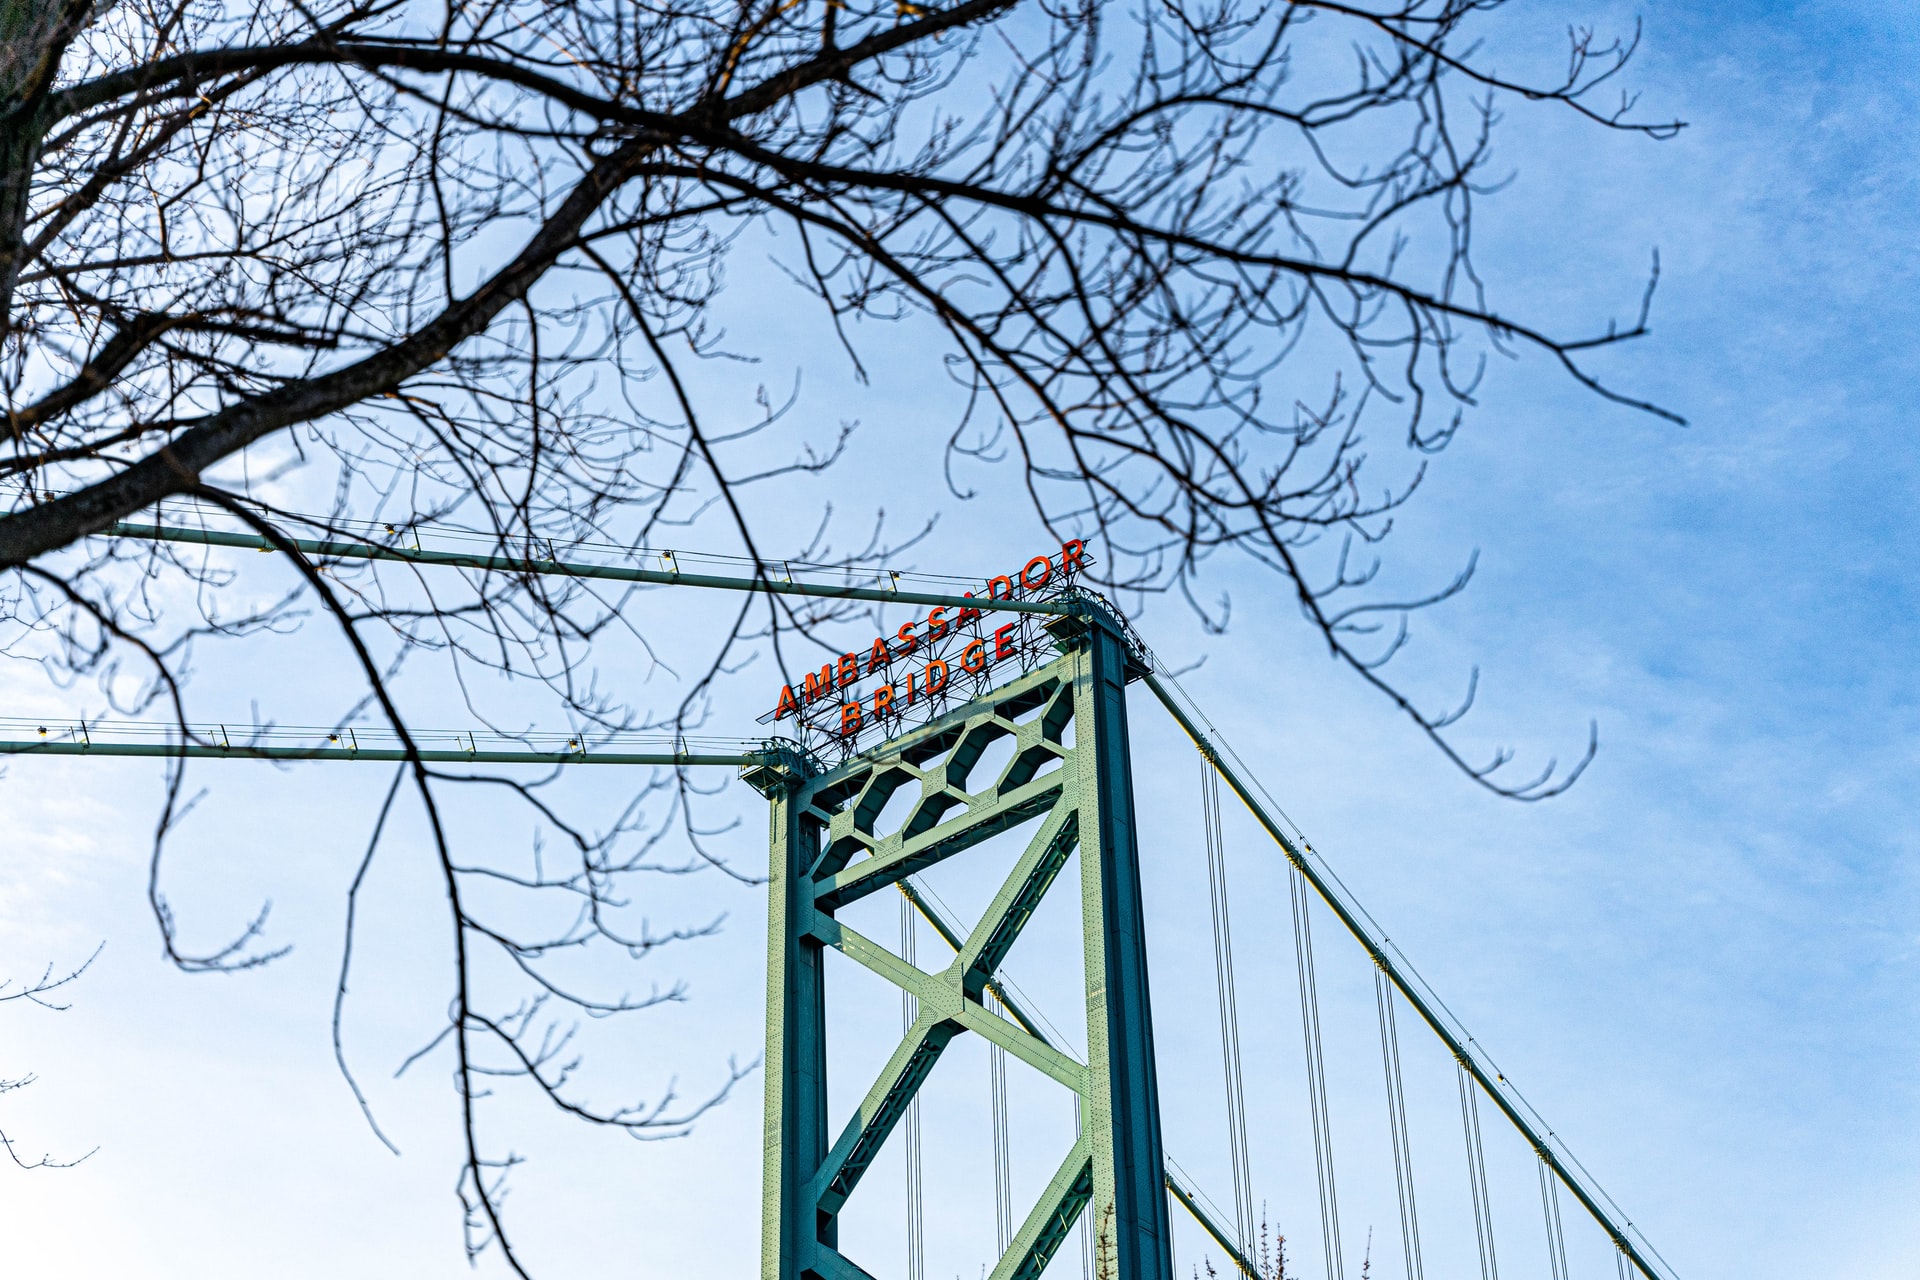 A view of the Ambassador Bridge which separates Windsor, Ontario from Detroit, Michigan